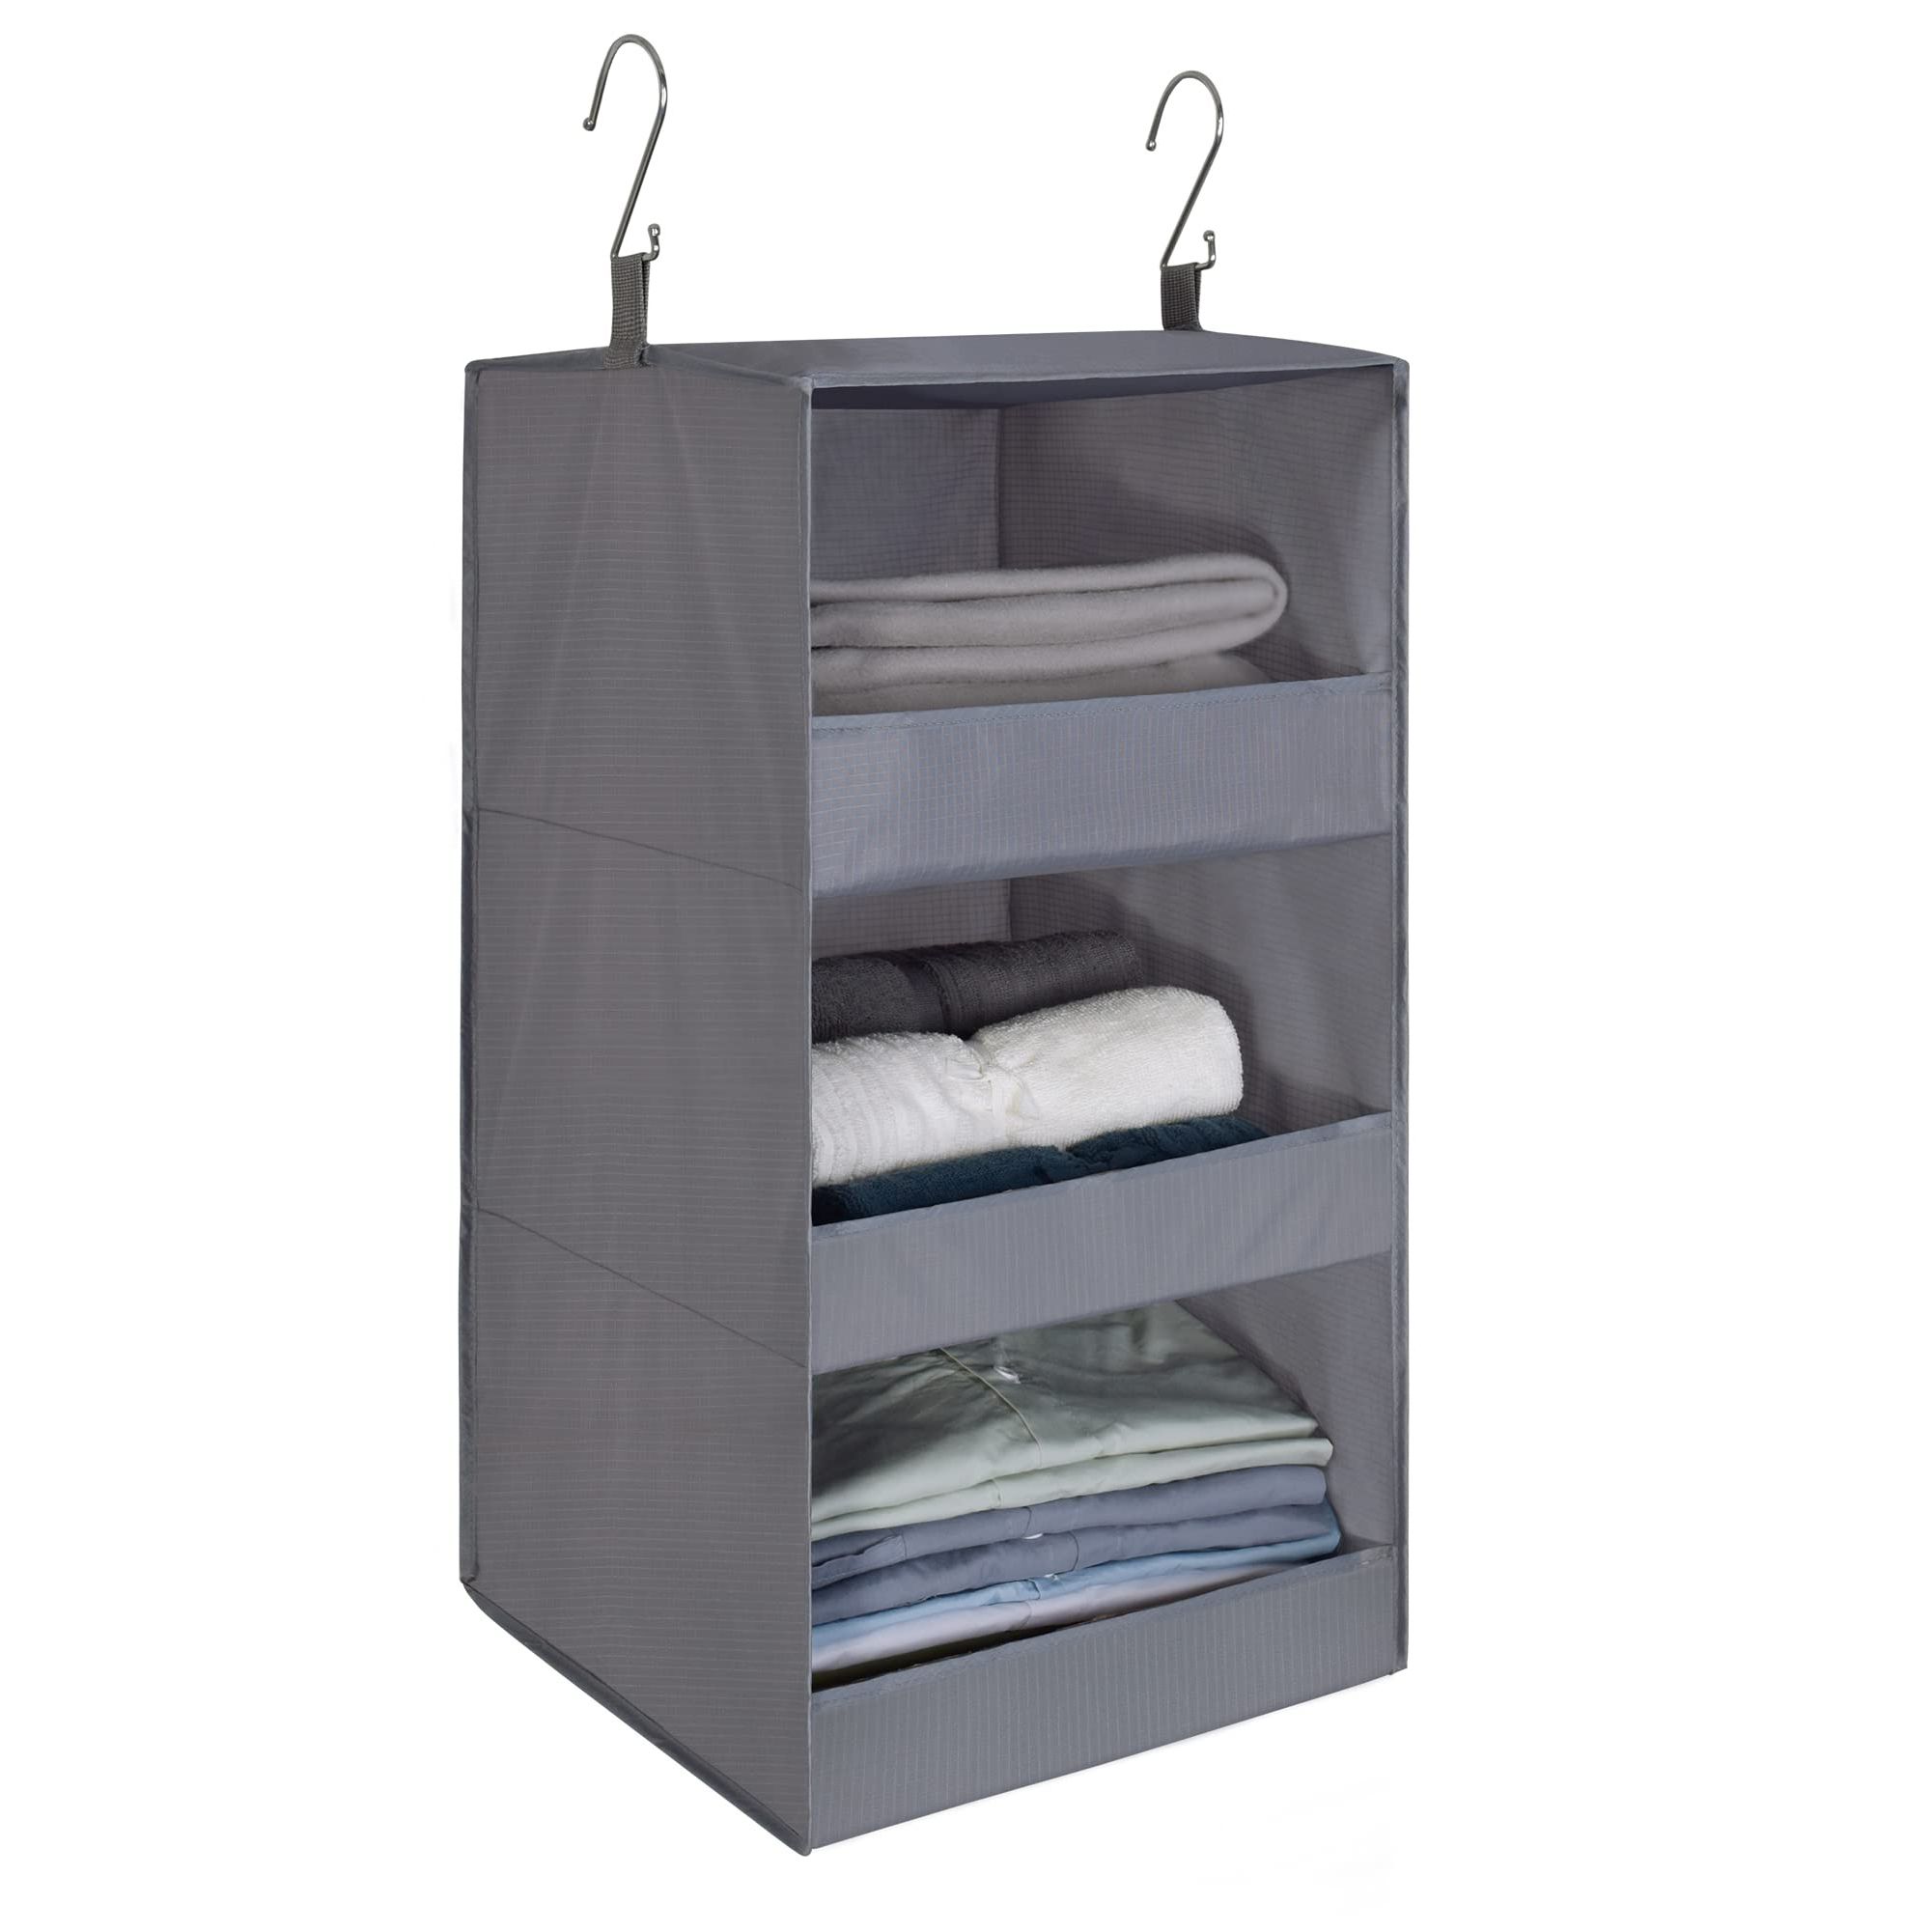 Famous Amazon: Granny Says 3 Shelf Hanging Closet Organizer And Storage,  Collapsible Hanging Closet Shelves, Hanging Organizer For Closet & Rv,  Gray, 29 ¾" H X 12" W X 12" D, 1 Pack : Home & Kitchen For 3 Shelf Hanging Shelves Wardrobes (View 5 of 10)